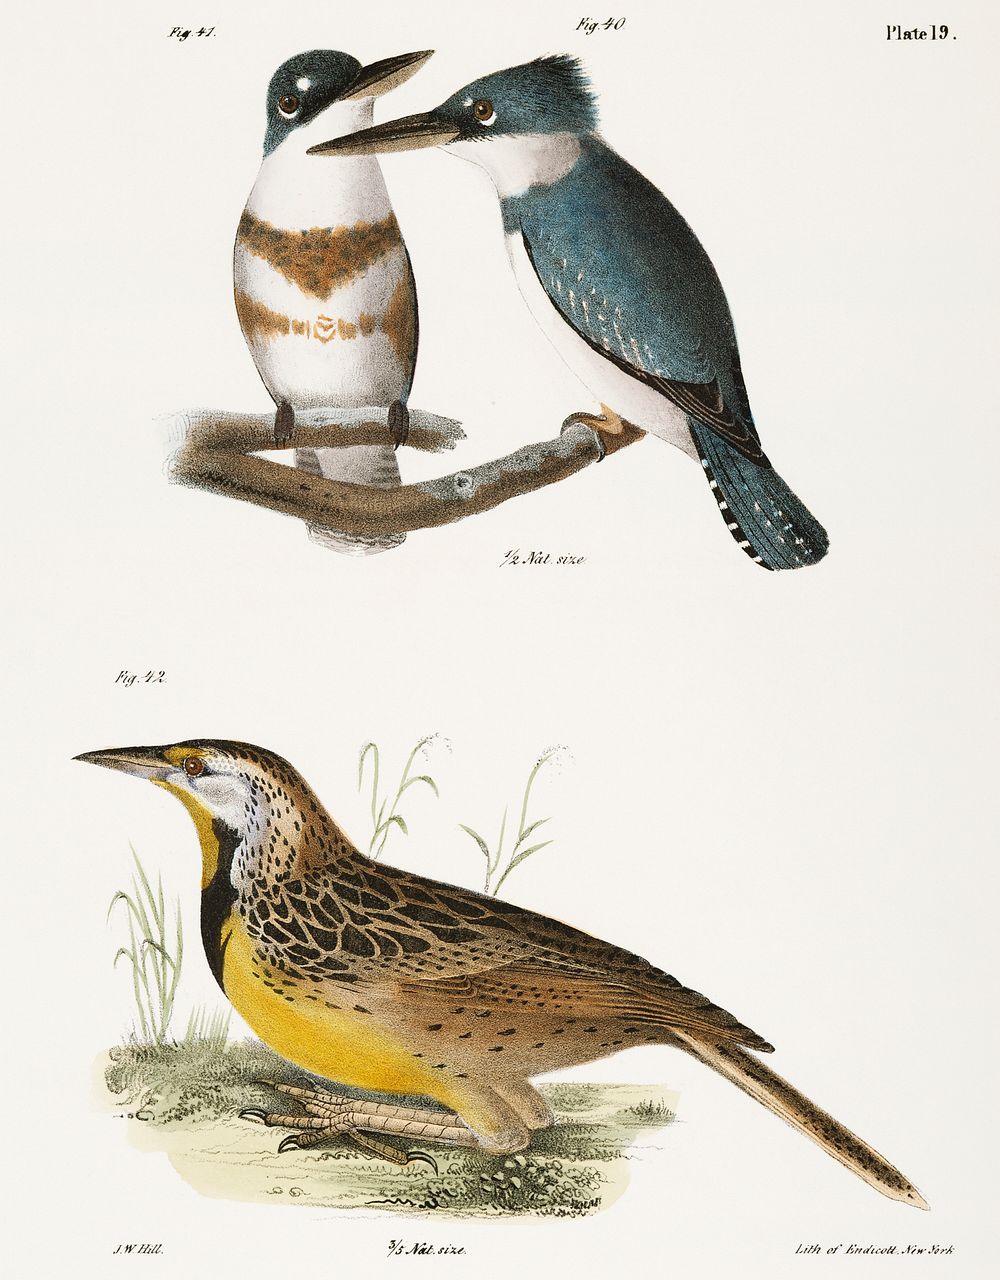 40. & 41. The Belted Kingfisher (Alcedo alcyon) 42. The Meadow Lark (Sturnella ludoviciana) illustration from Zoology of New…